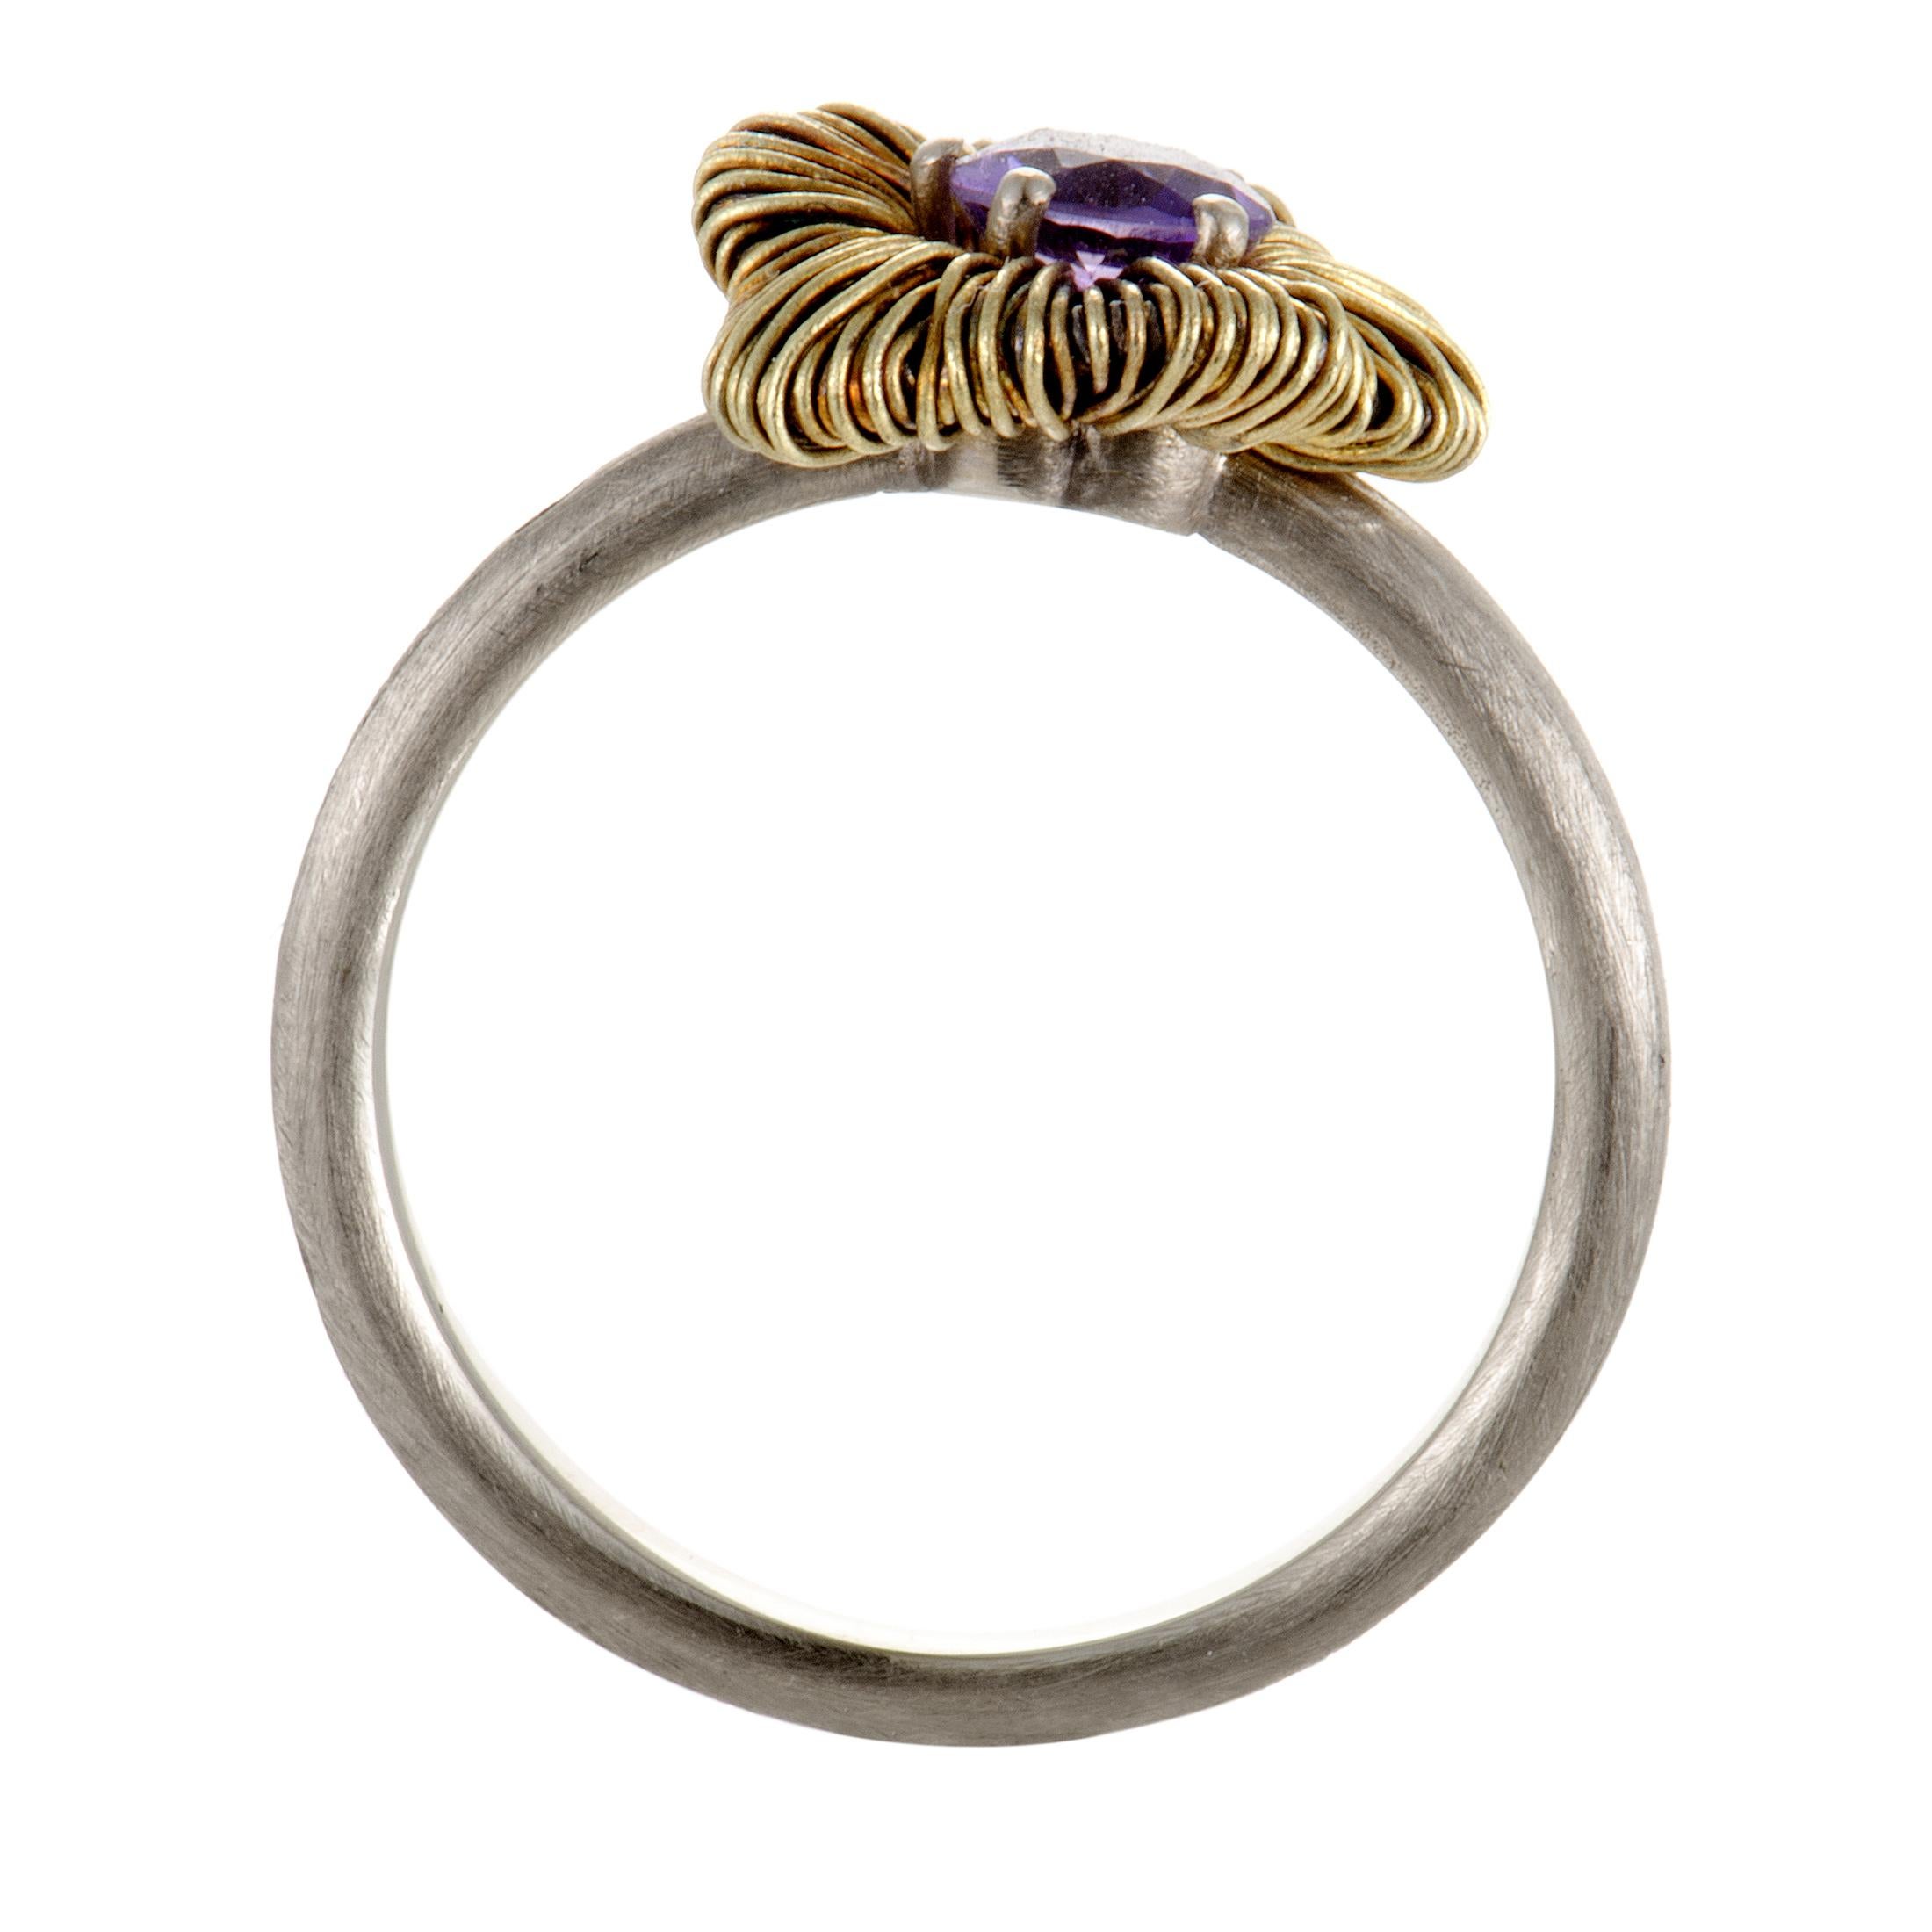 Gorgeously complementing tones and a resolutely feminine overall spirit of this marvelous ring from Pasquale Bruni produce a fabulous effect, with a nifty amethyst added to 18K yellow gold and gleaming silver.
